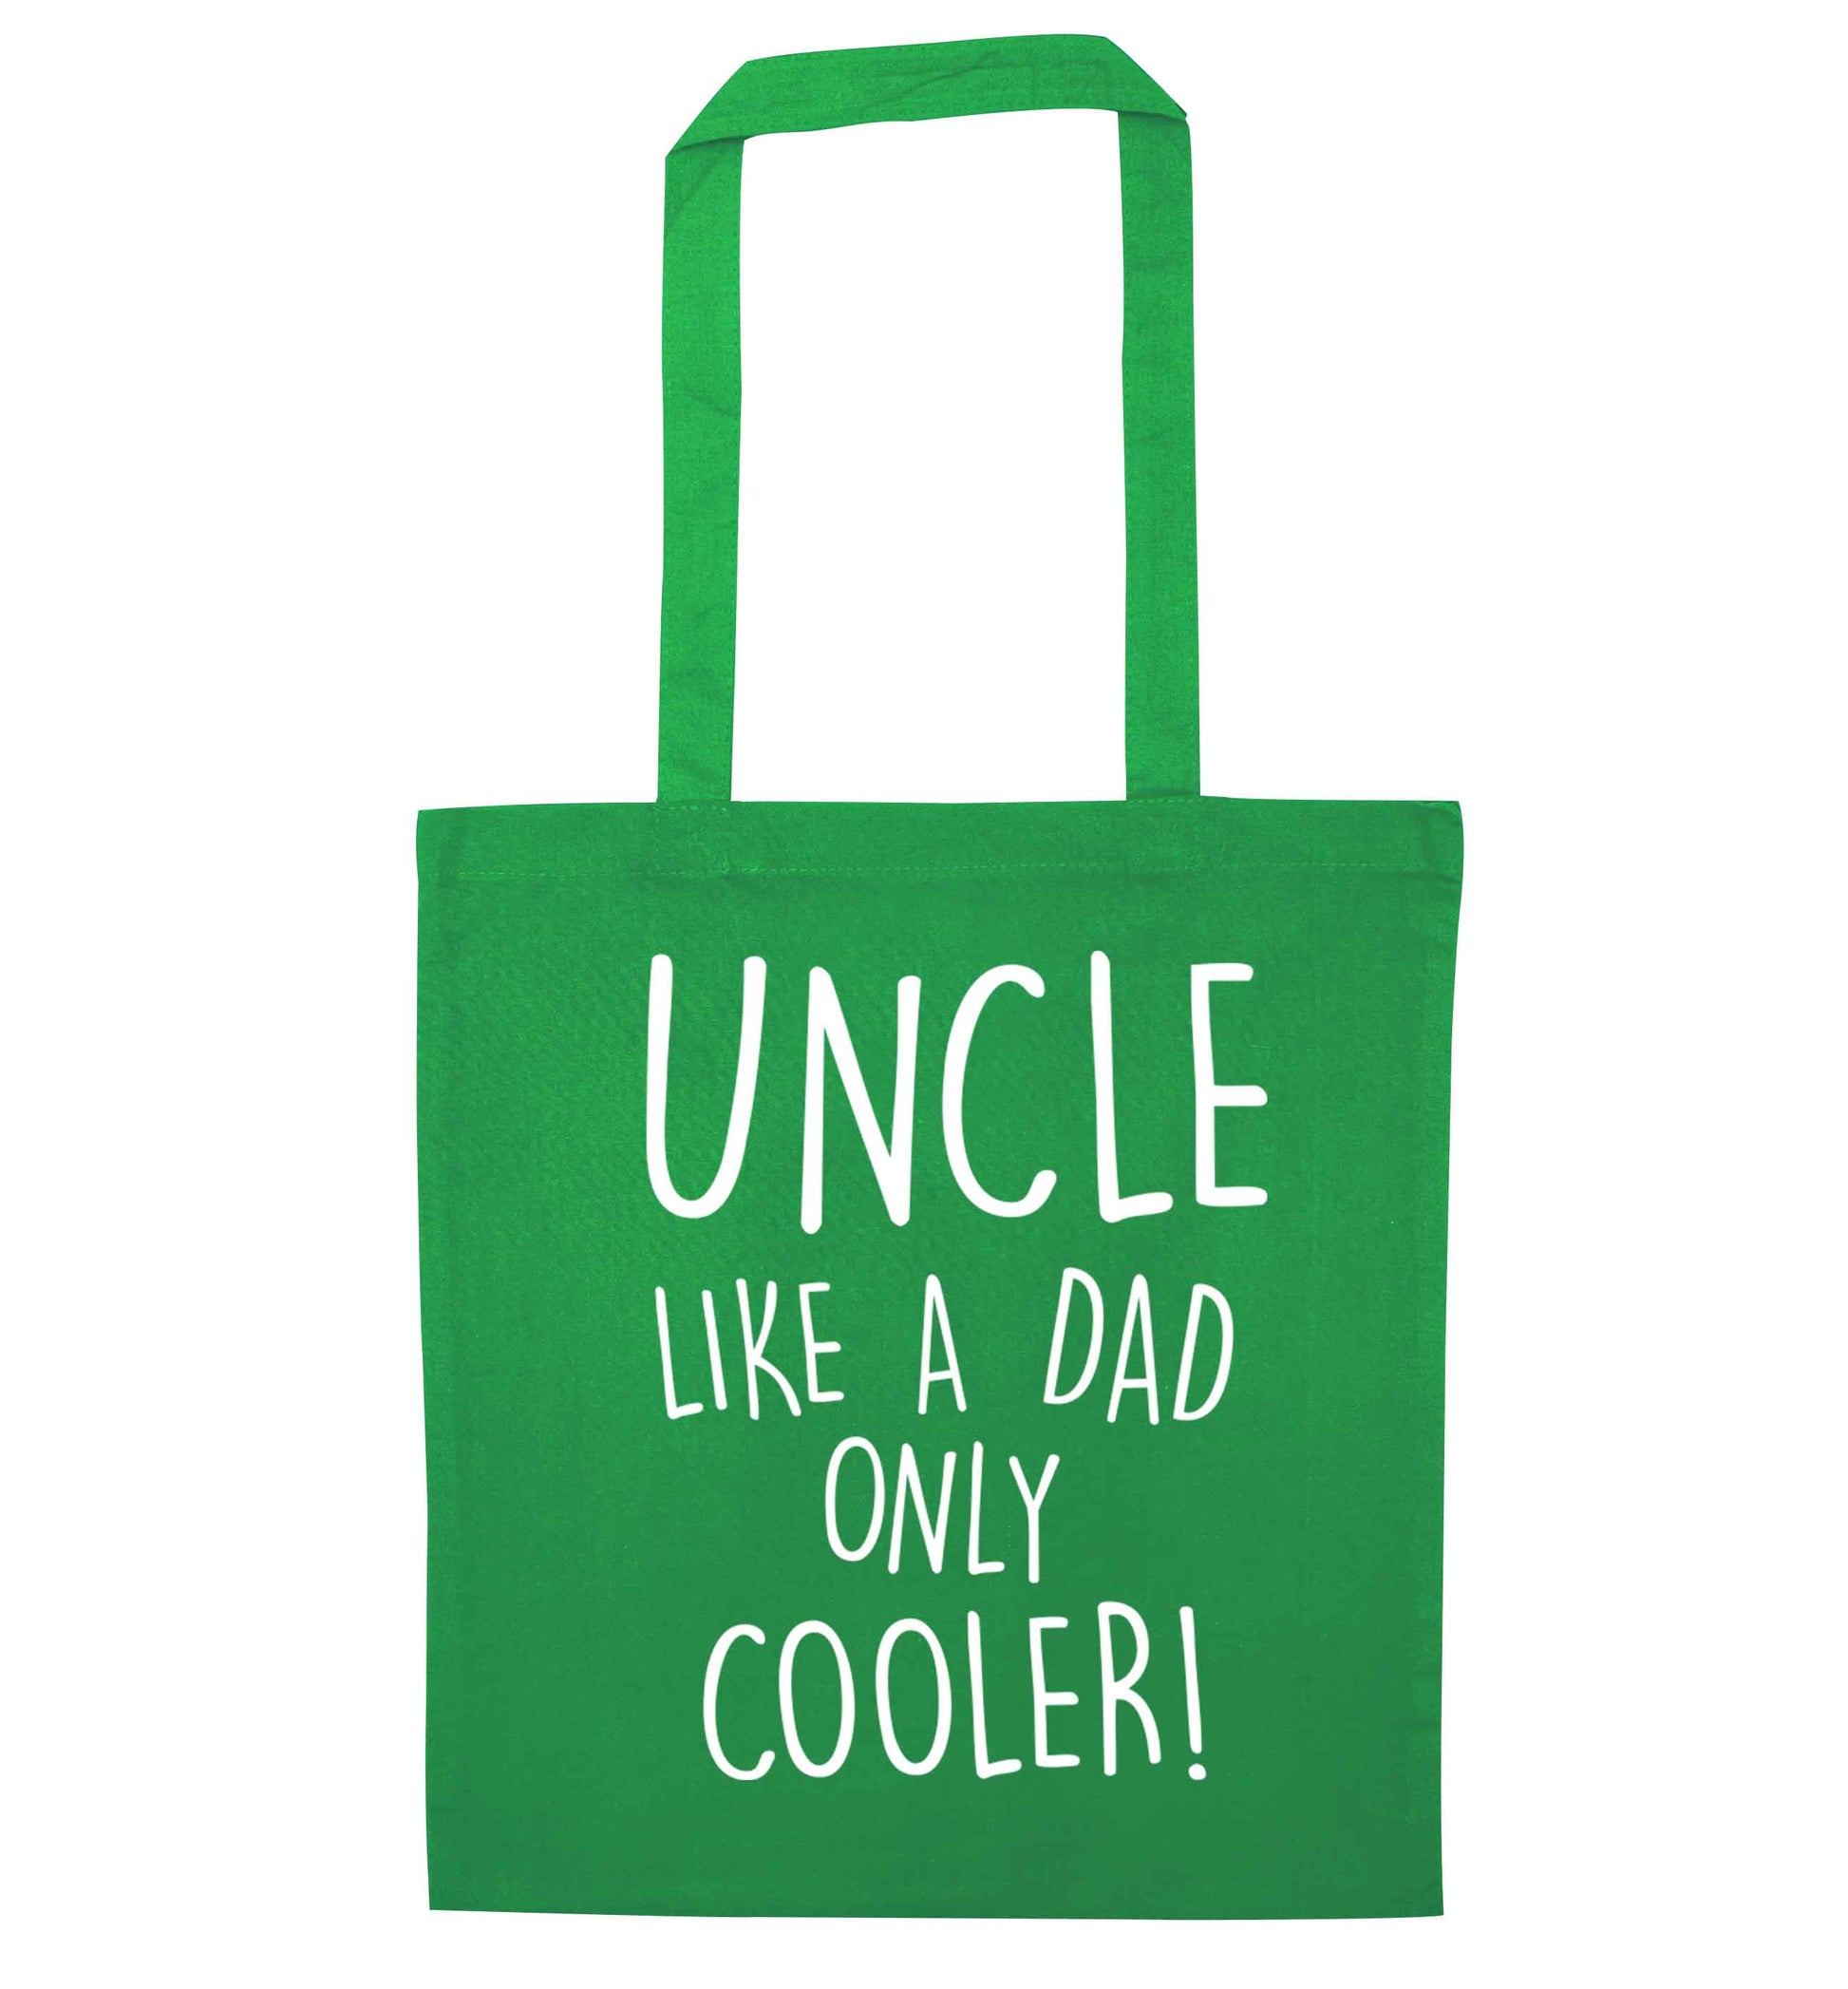 Uncle like a dad only cooler green tote bag